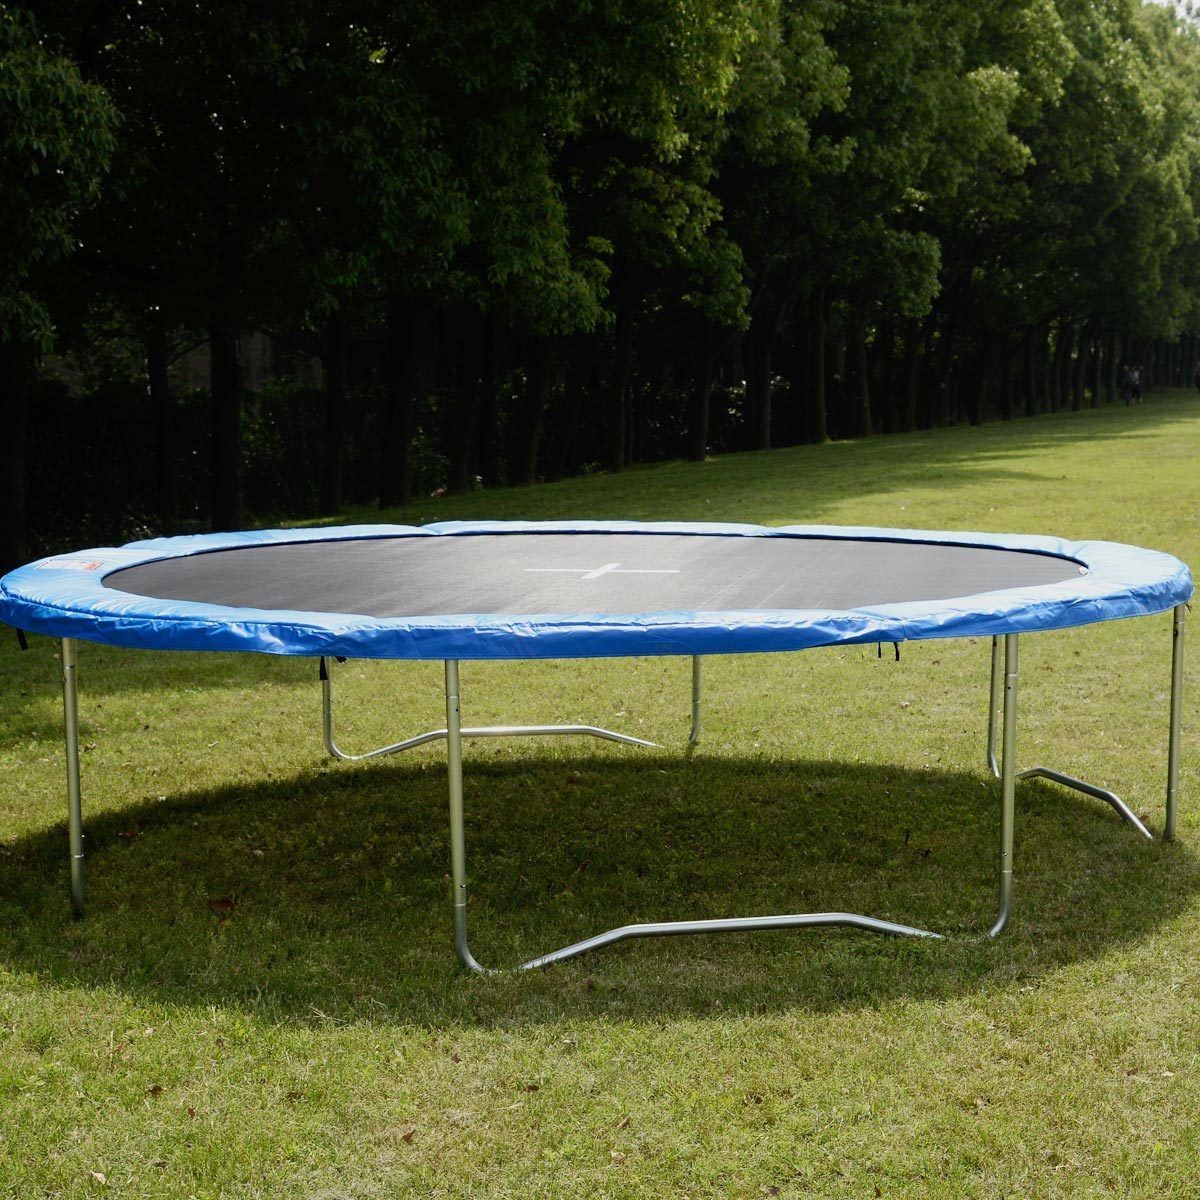 Blue Safety Round Spring Pad Replacement Cover For 15 Ft. Trampoline